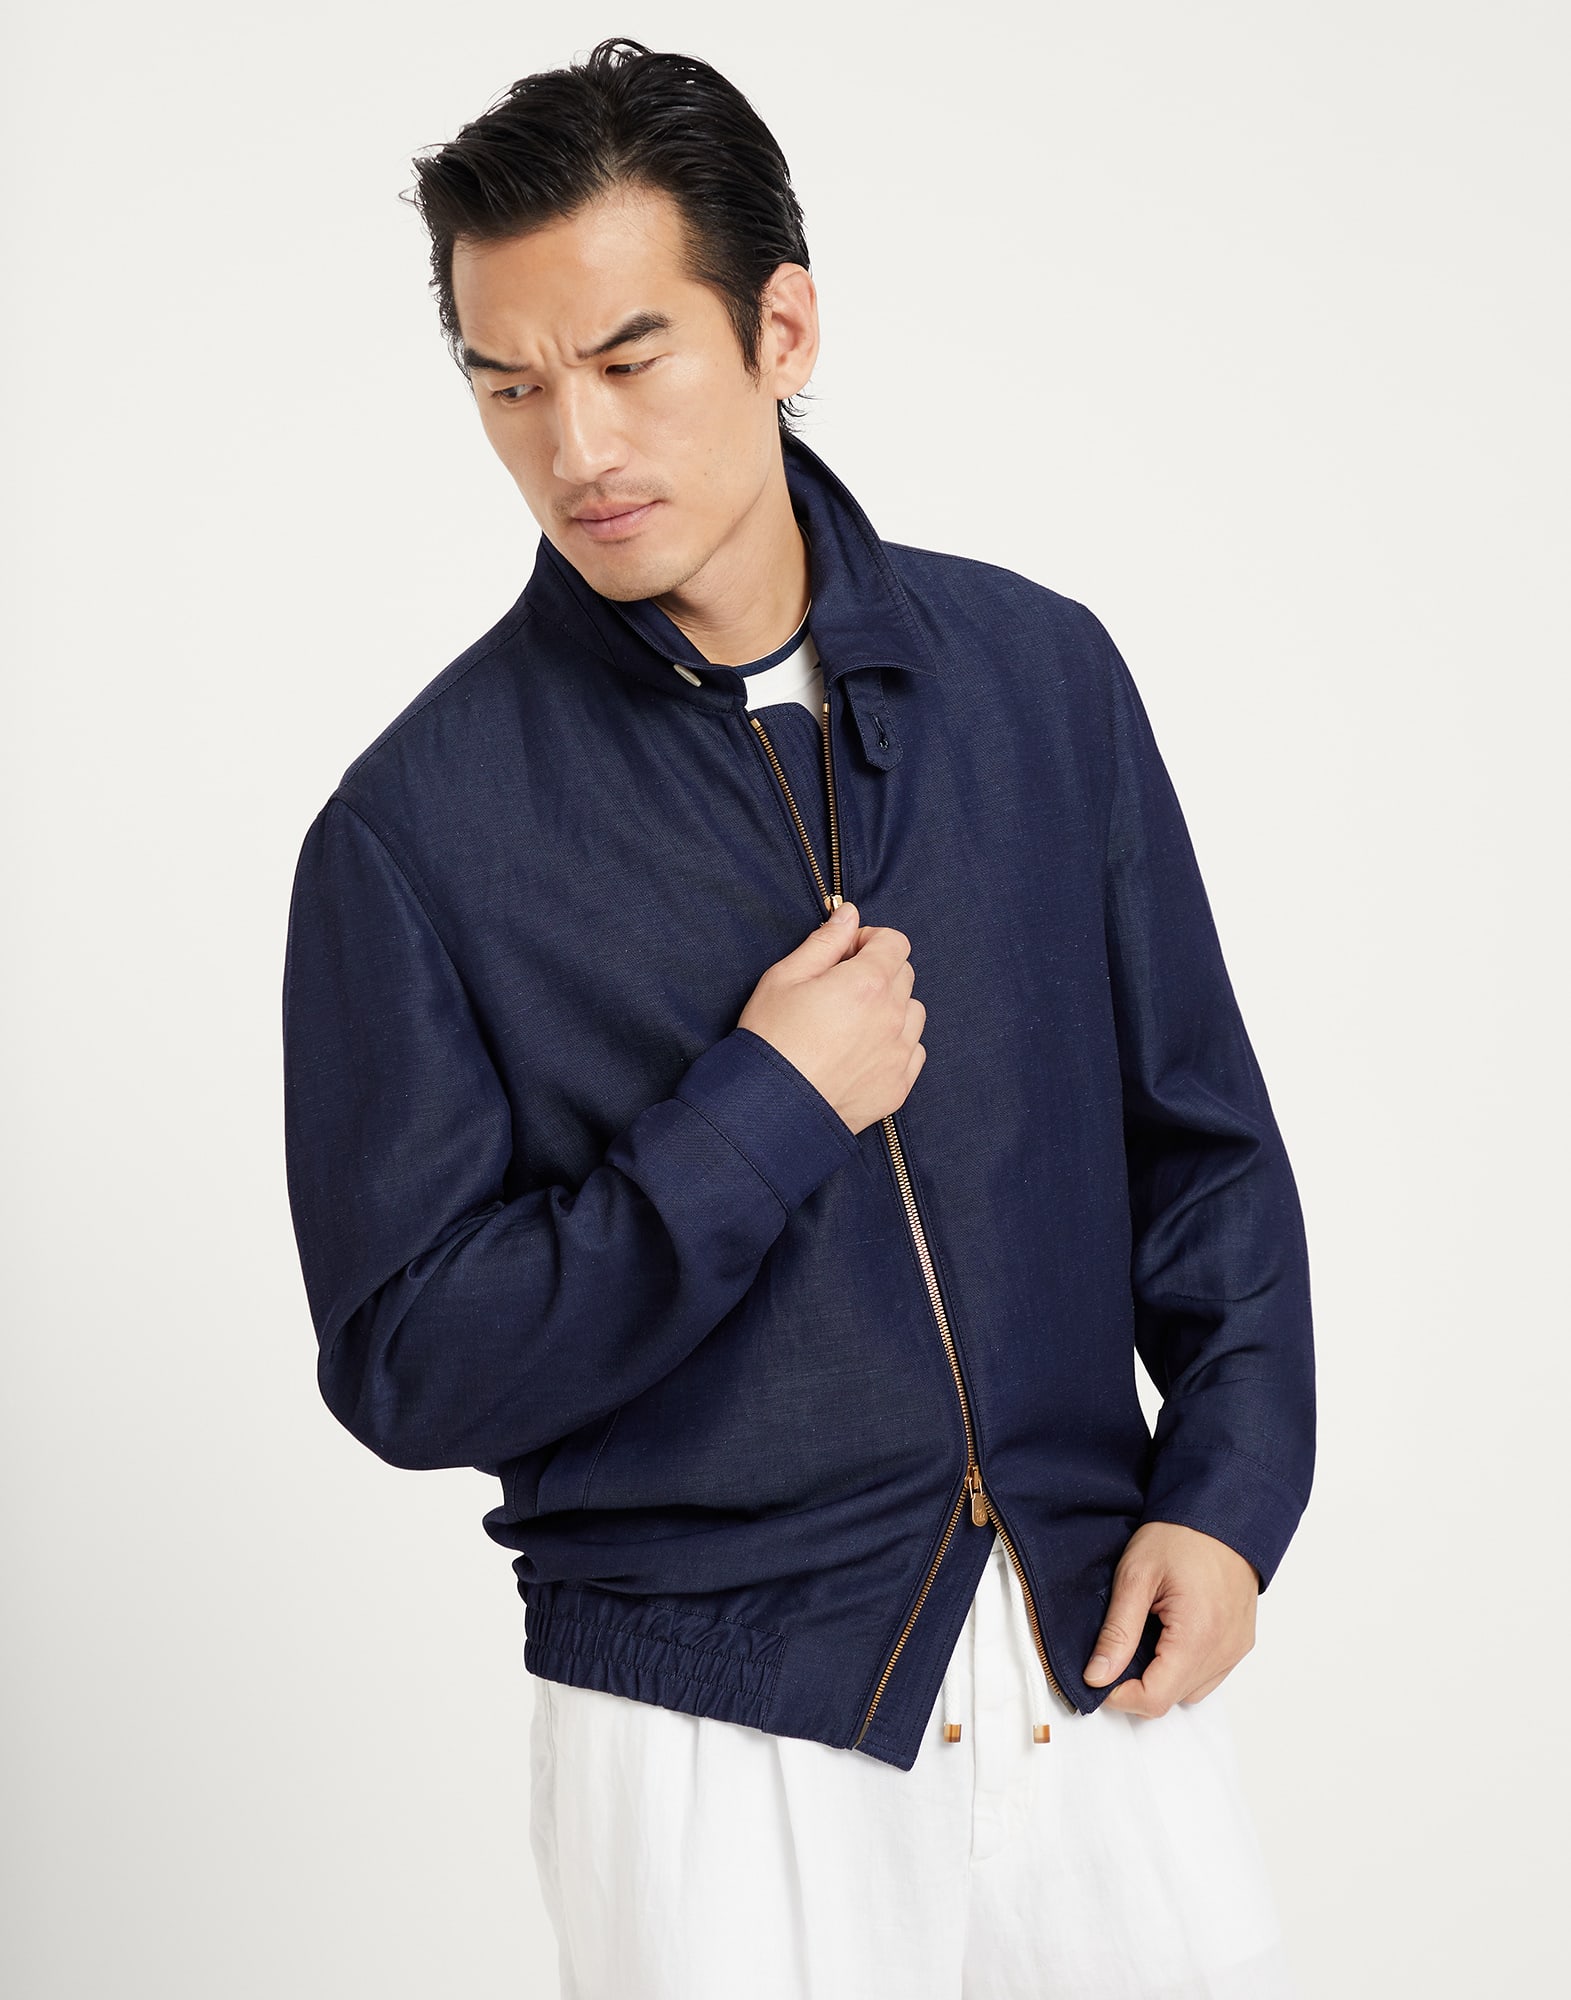 Wool and linen twill jacket